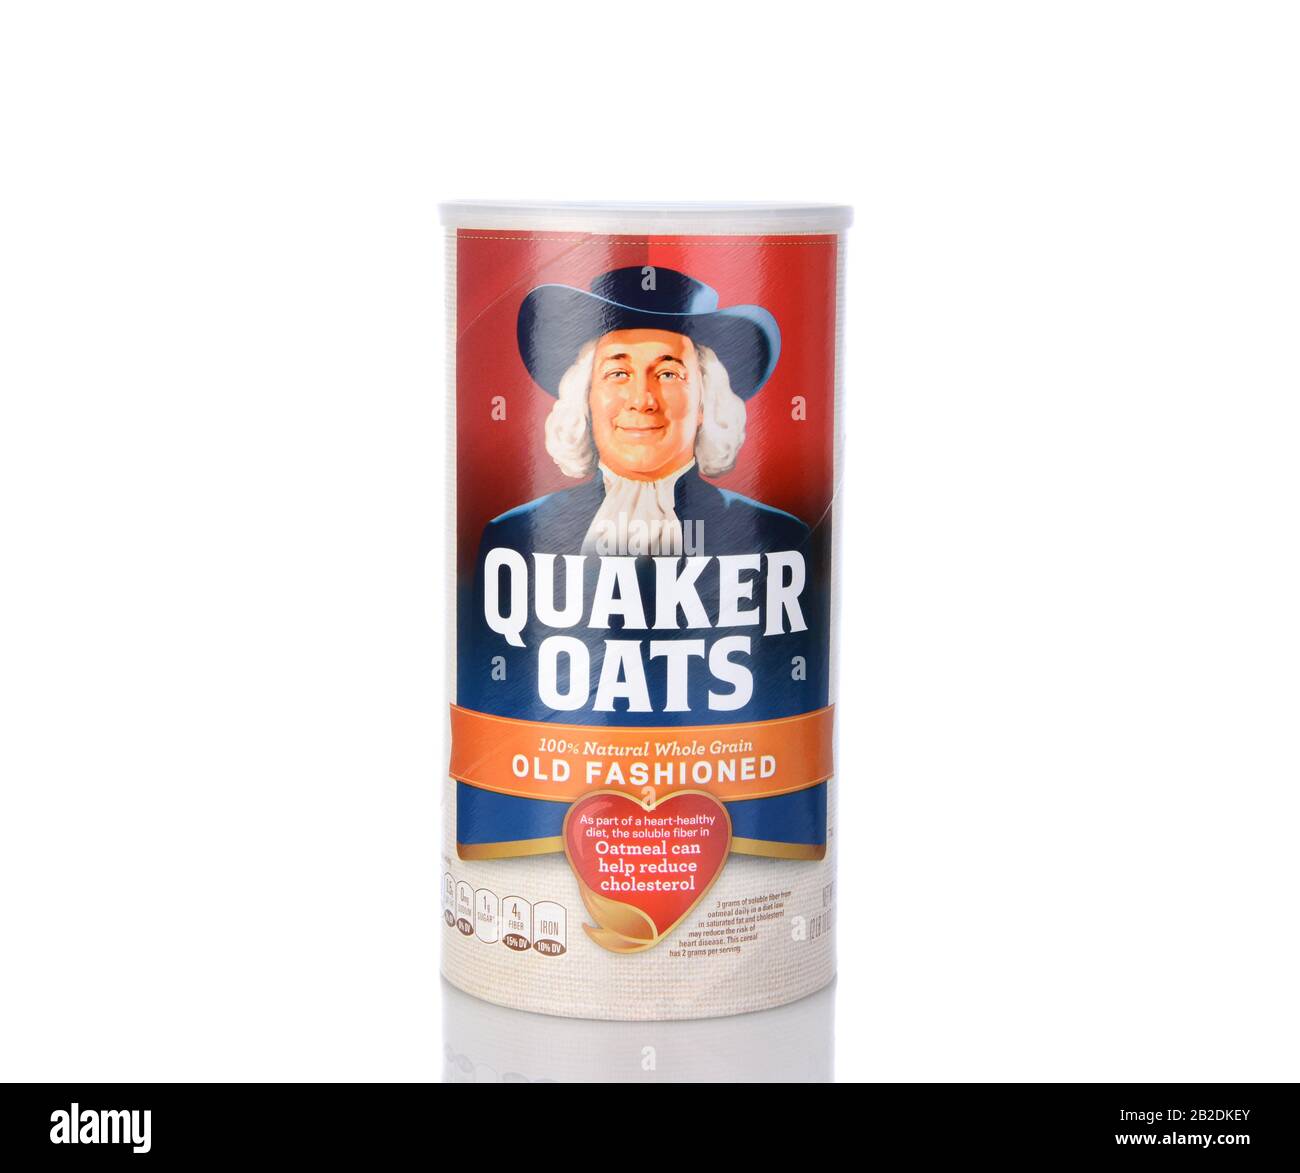 IRVINE, CA - January 05, 2014: A box of Quaker Oats Old Fashioned. Founded in 1901 the Quaker Oats Company has been owned by Pepsico since 2001. Stock Photo